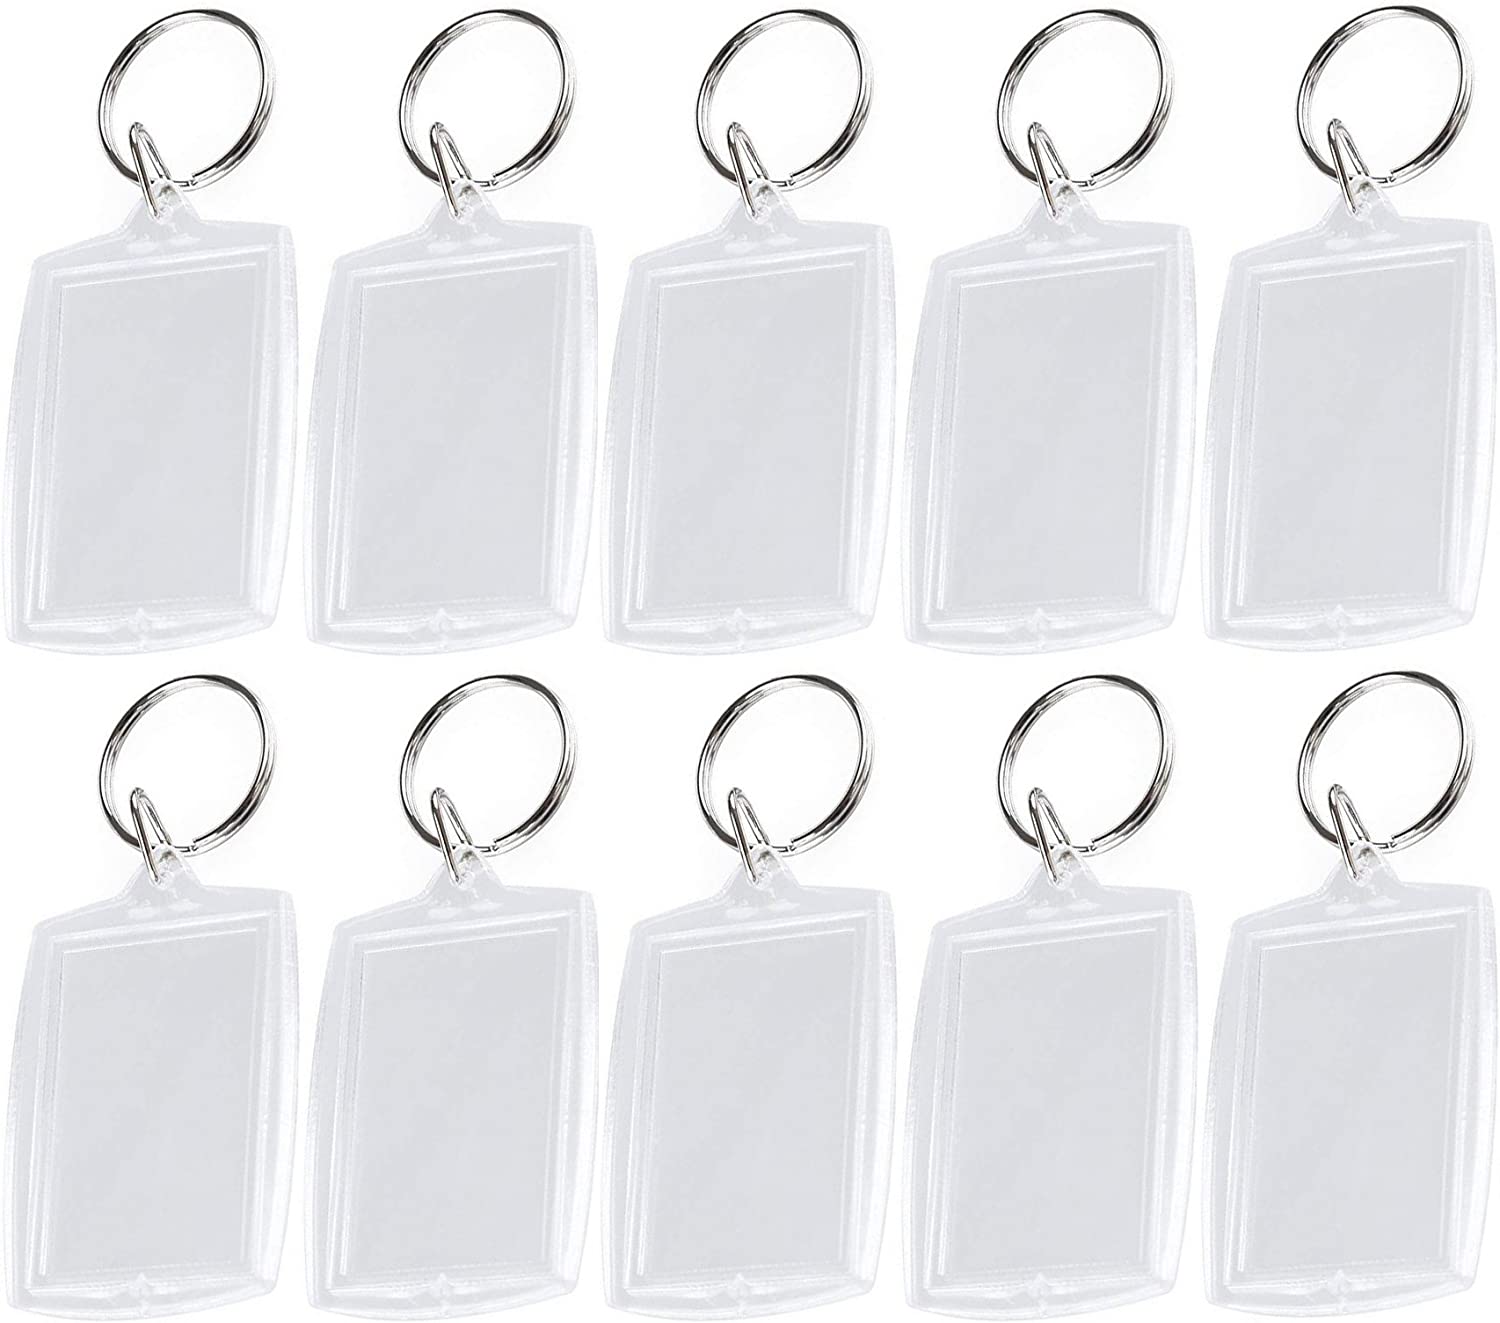 ArtCute 90 Pieces Clear Acrylic Keychain Blanks Rectangle 2 inch Plastic Clear Keychain Rectangle Blank for Vinyl with Key Chain Rings for DIY